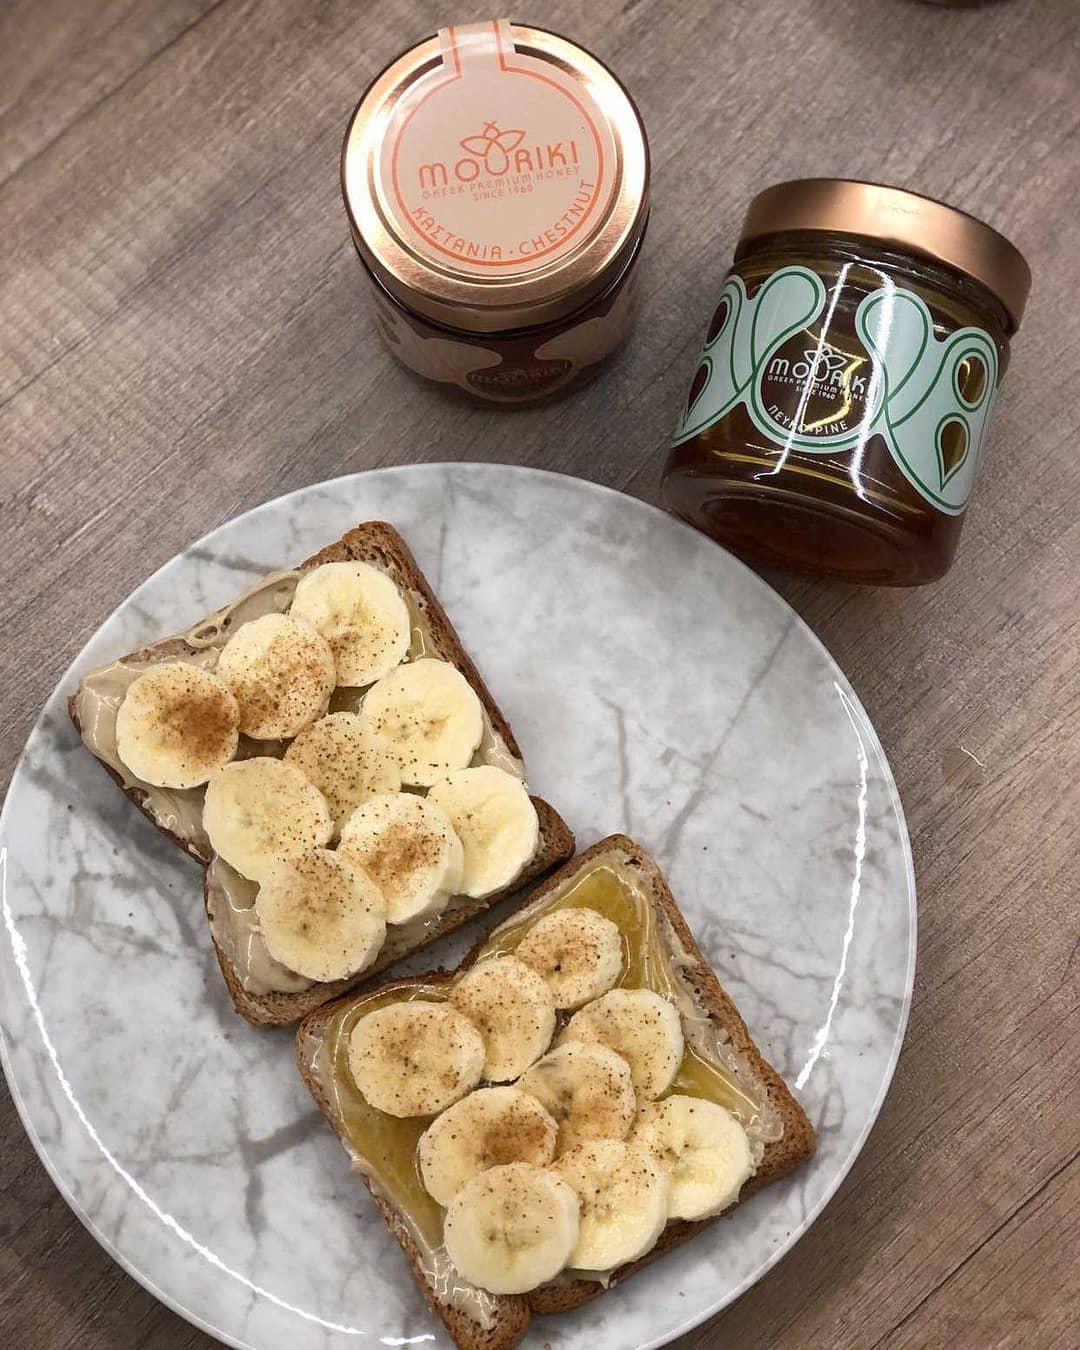 chestnut and pine honey on toasted banana bread